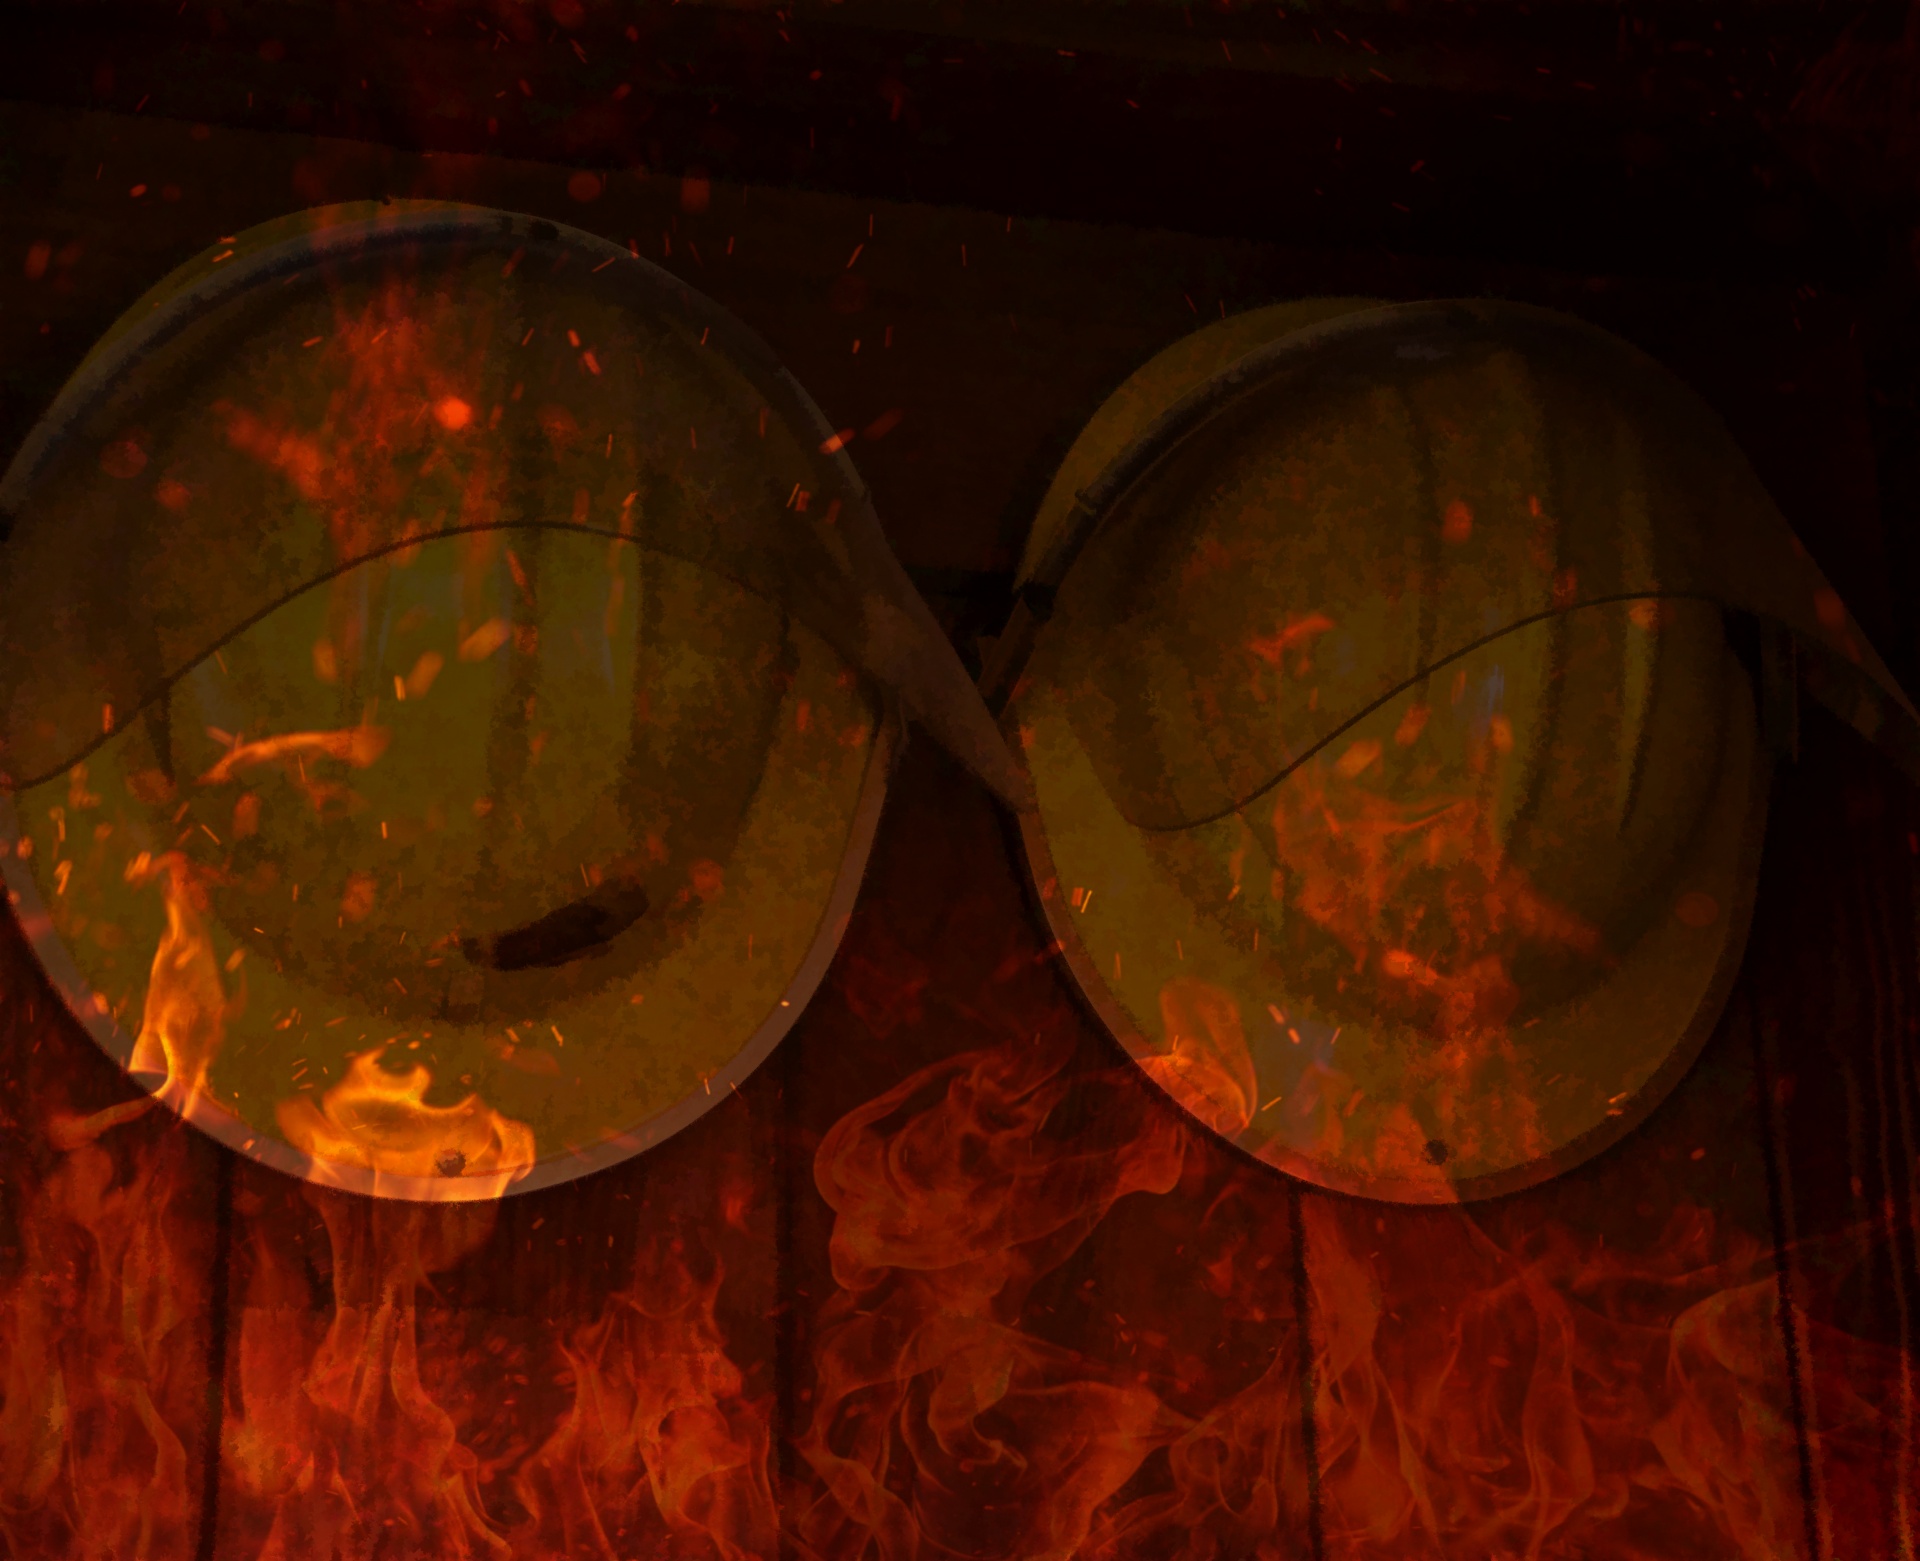 pair of yellow firefighter hats with flames overlay